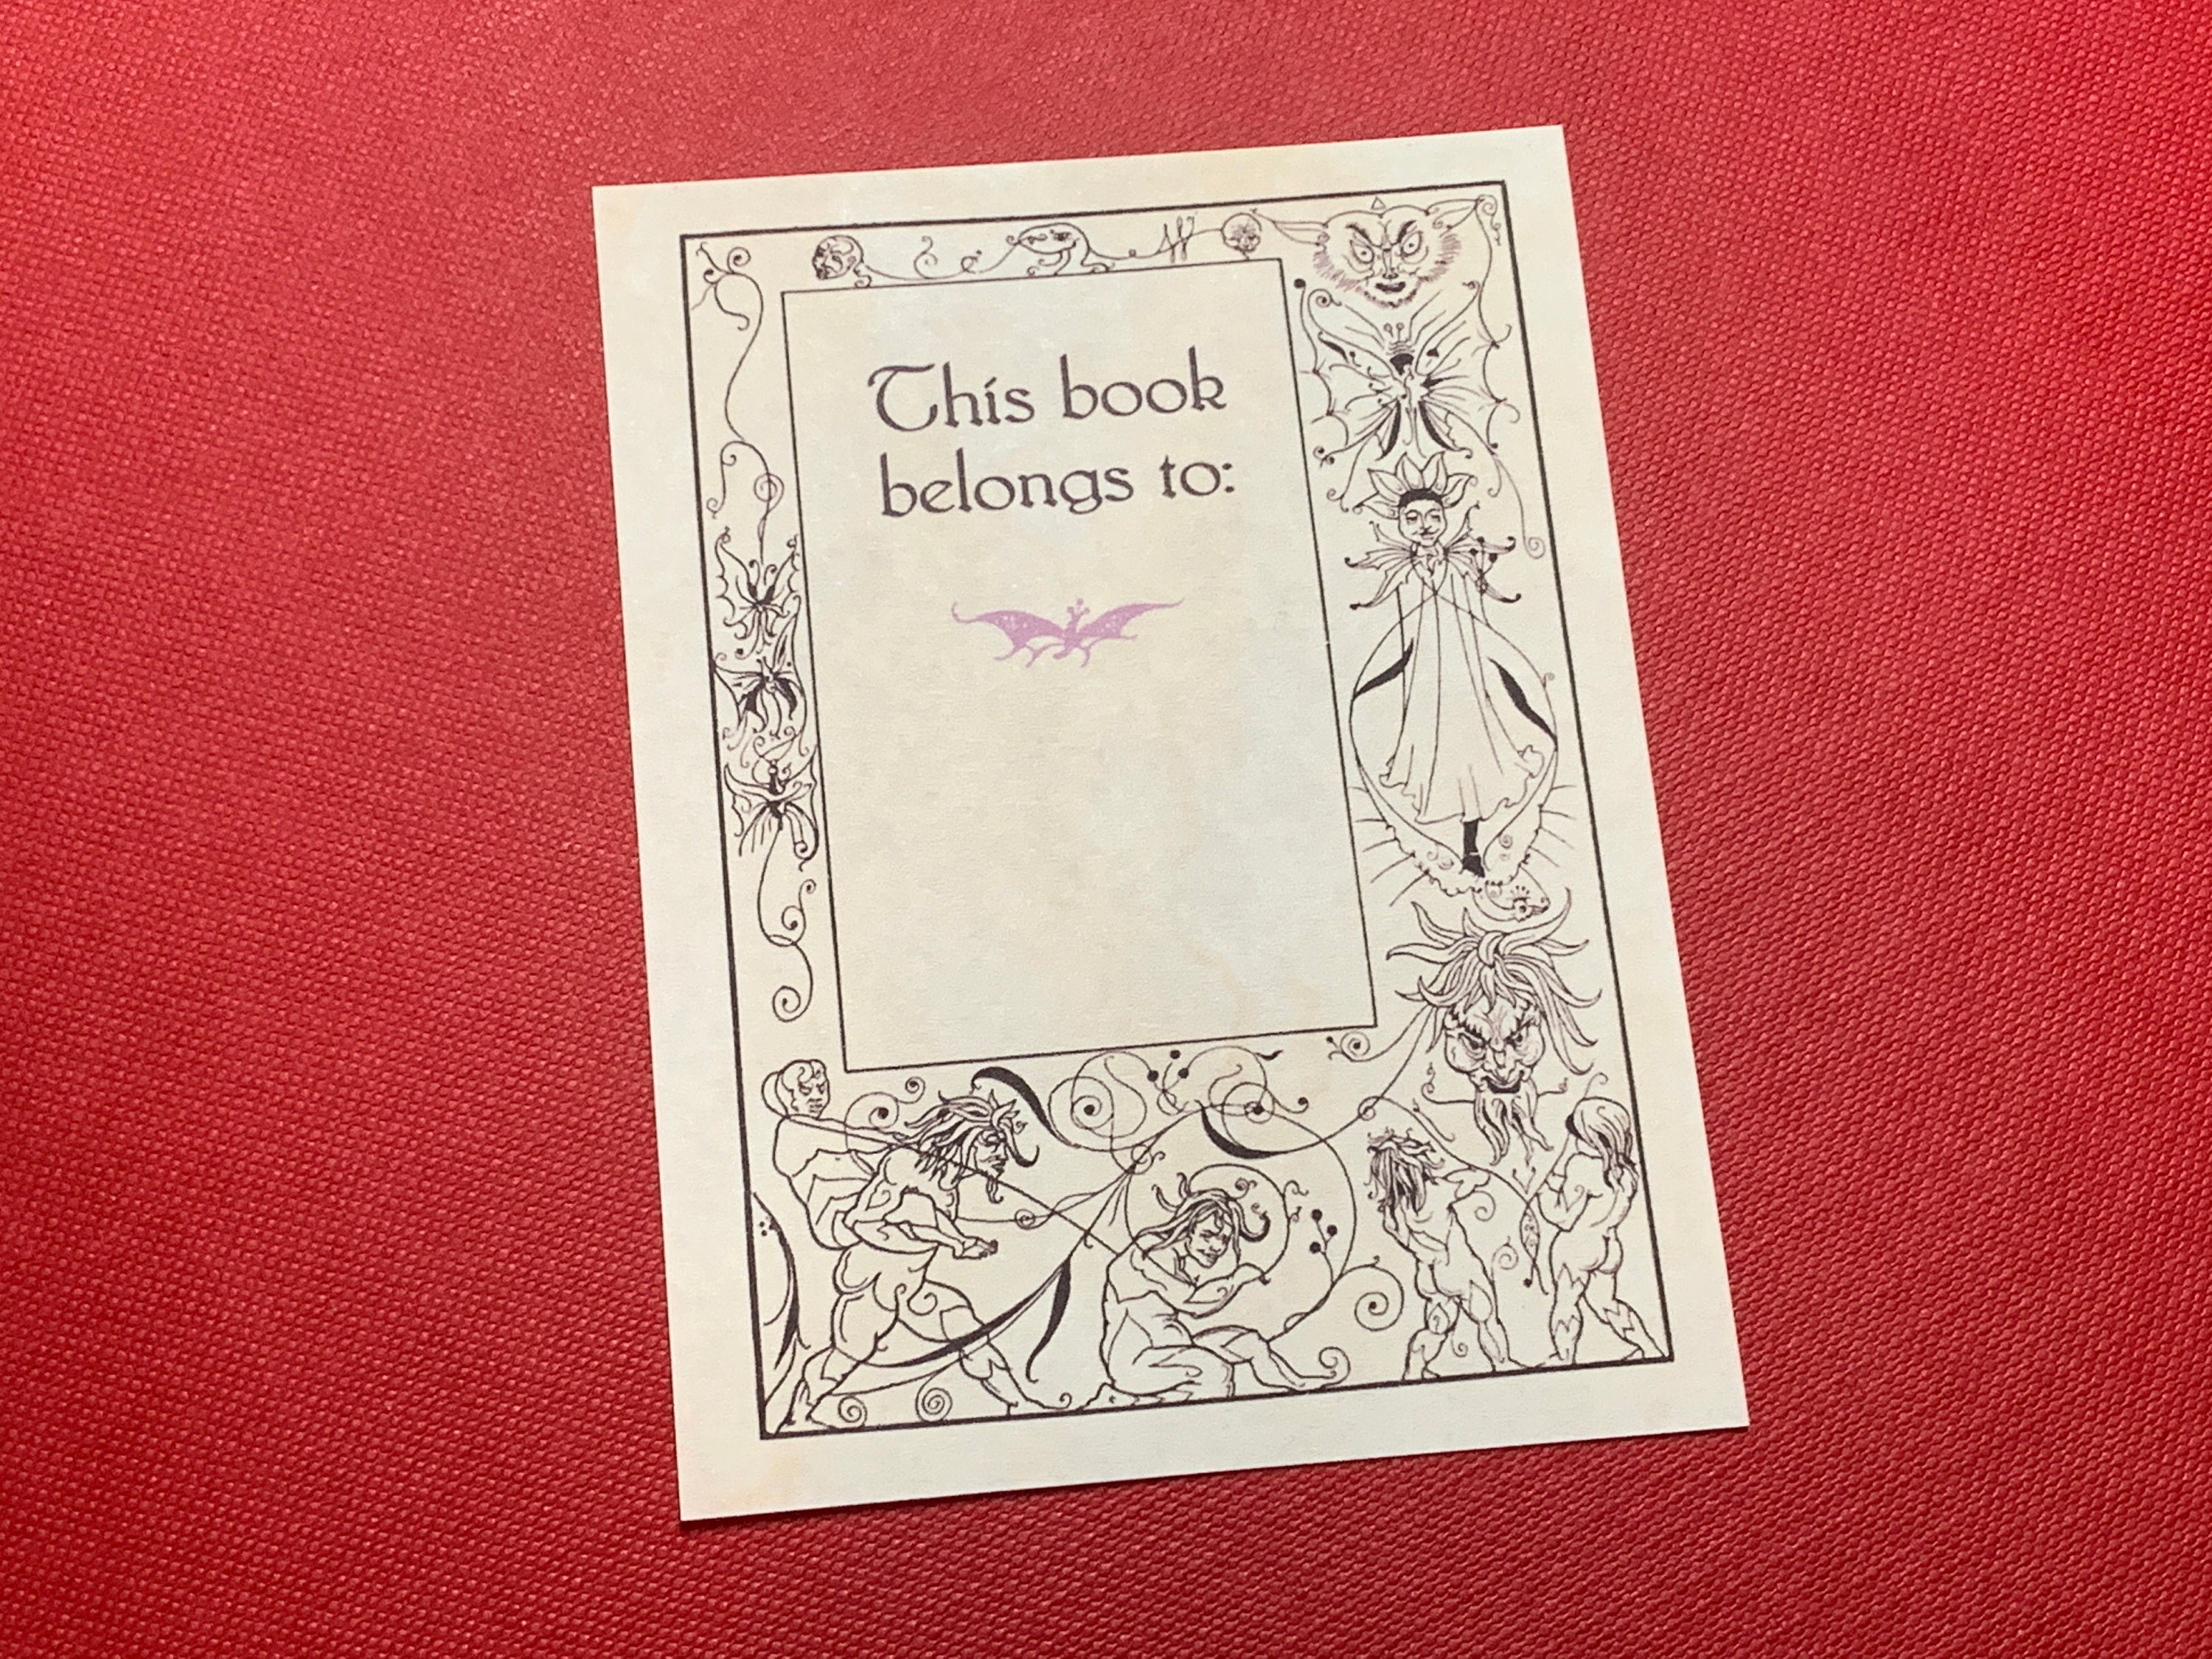 Aubrey Beardsley Fairies, Personalized, Ex-Libris Bookplates, Crafted on Traditional Gummed Paper, 3in x 4in, Set of 30